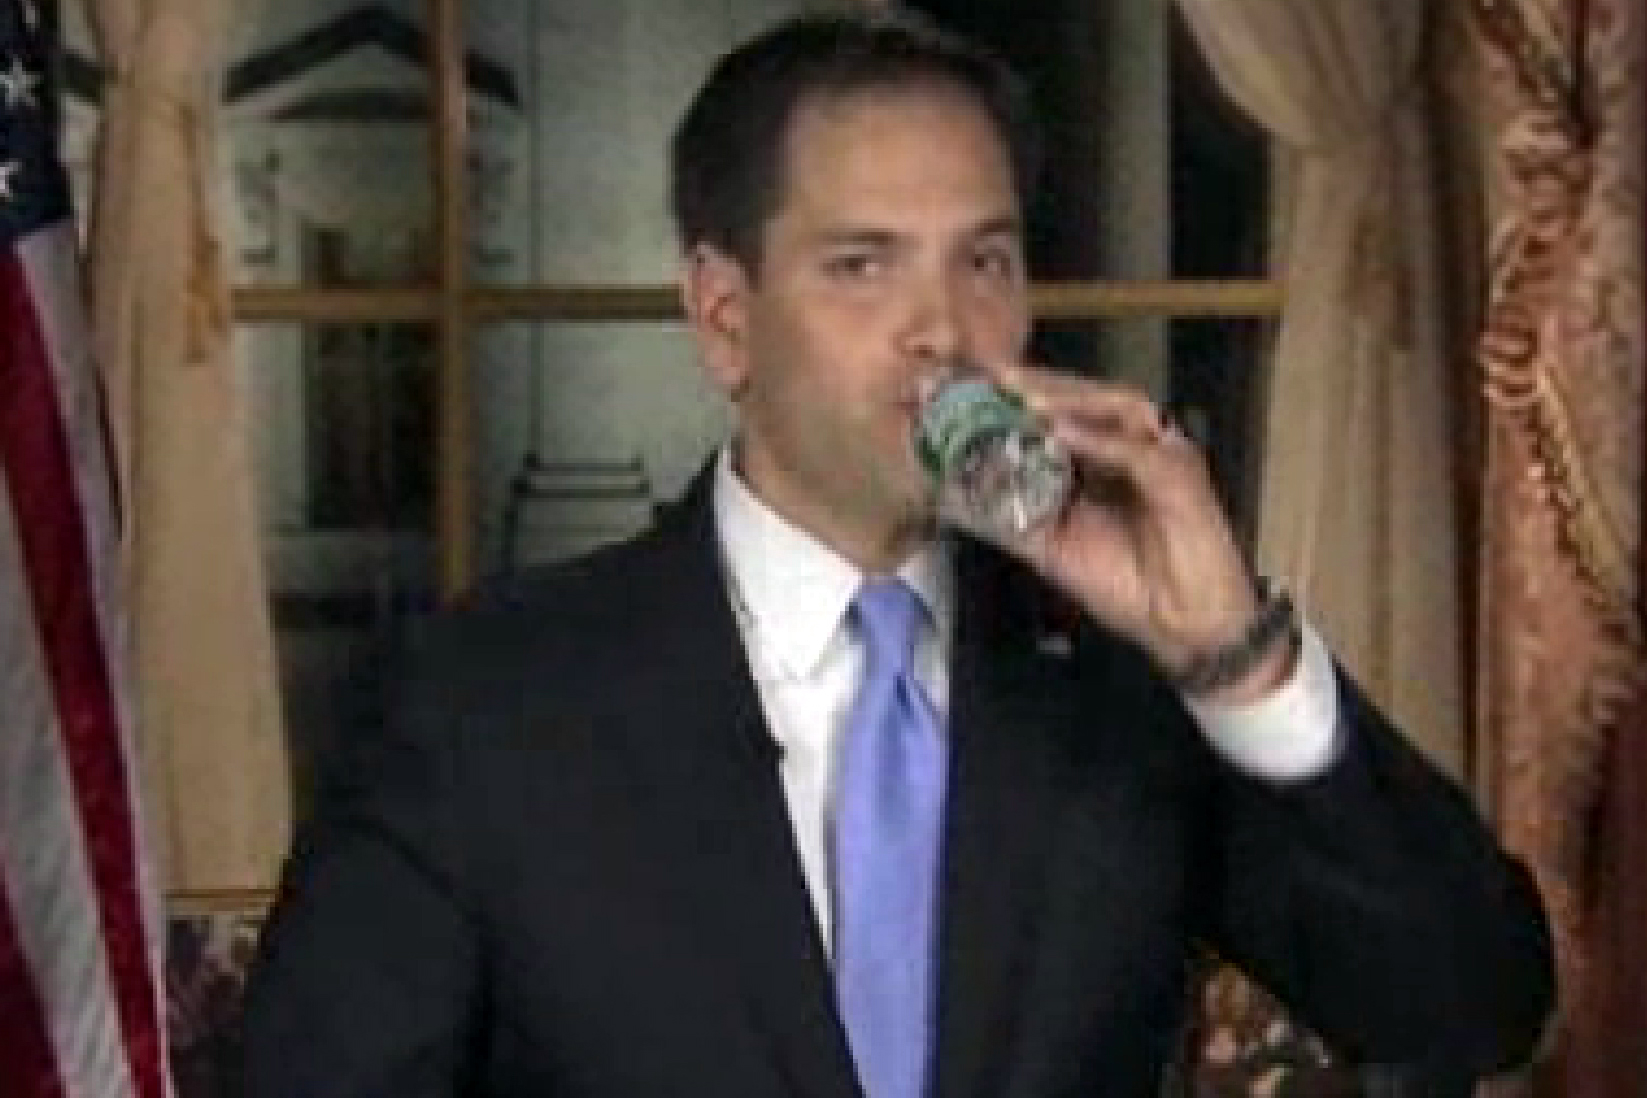 In this still frame made from video, Florida Sen. Marco Rubio drinks water during his Republican response to President Barack Obama's State of the Union address, on Feb. 12, 2013, in Washington.